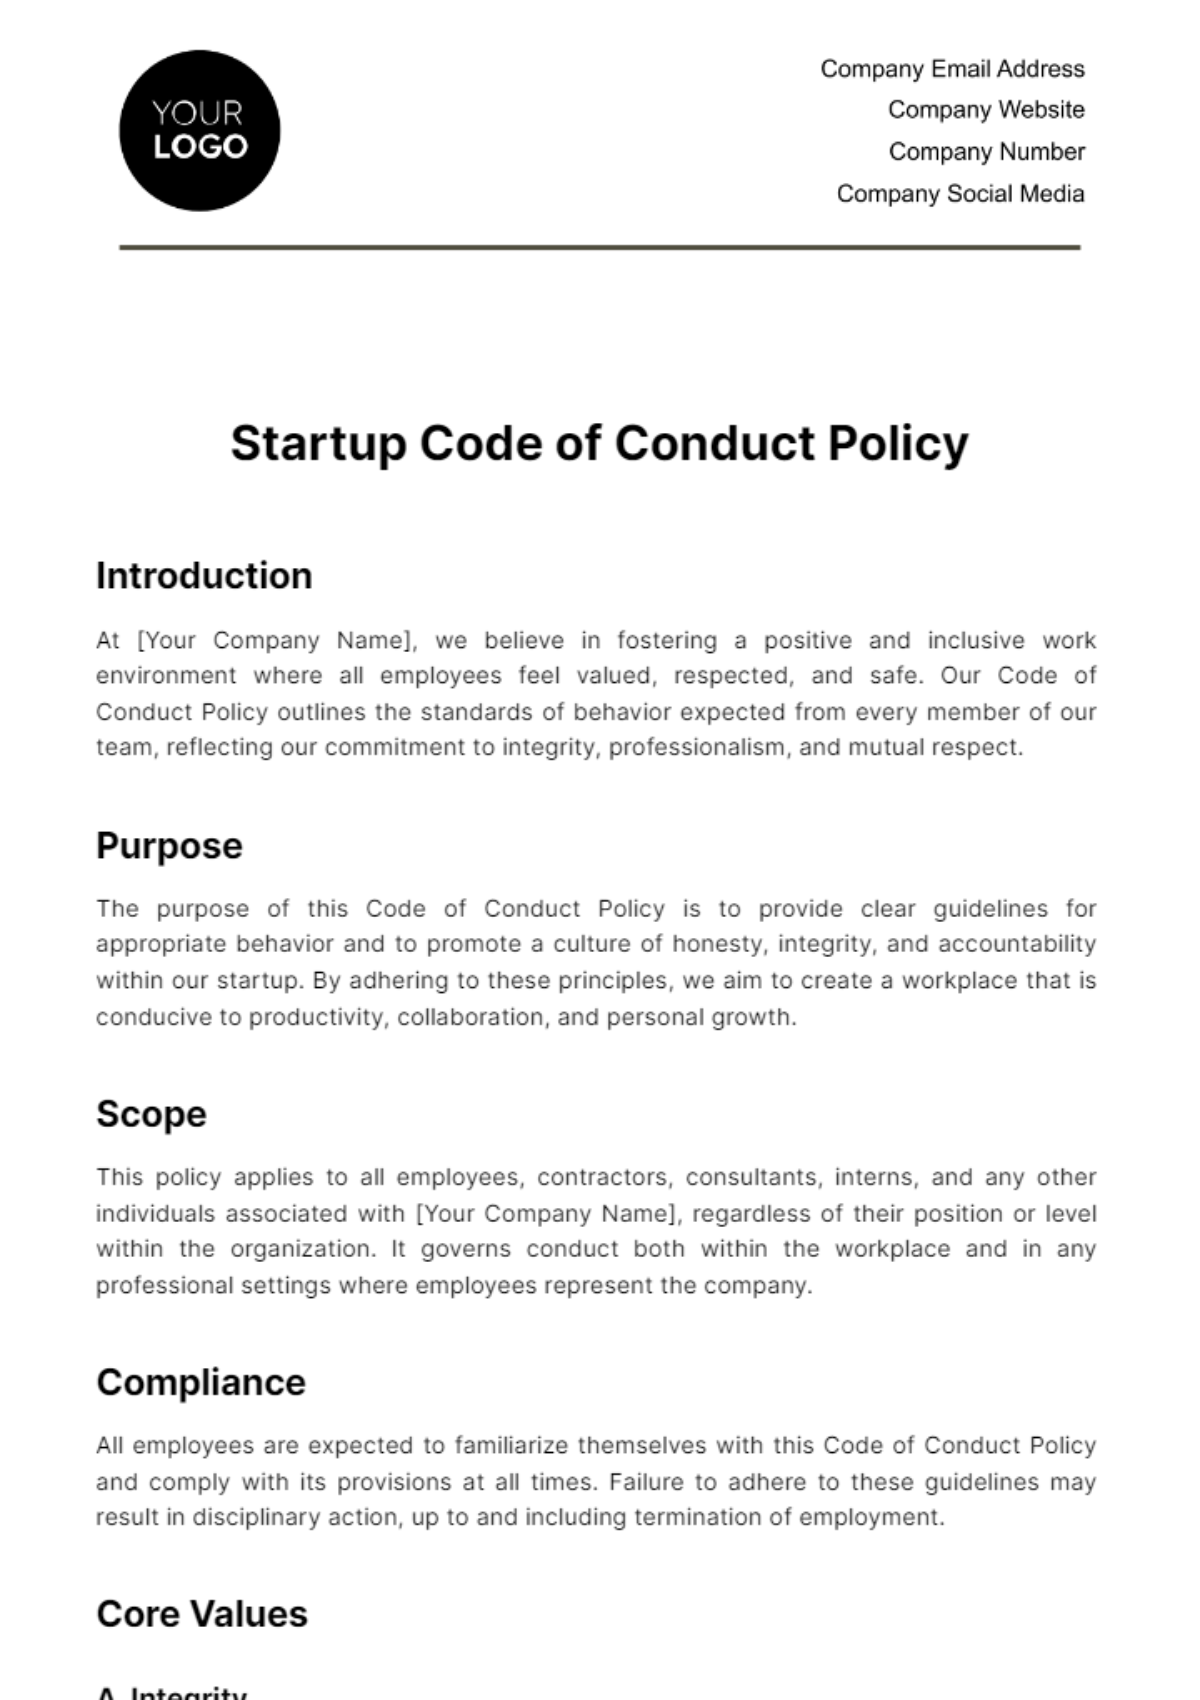 Startup Code of Conduct Policy Template